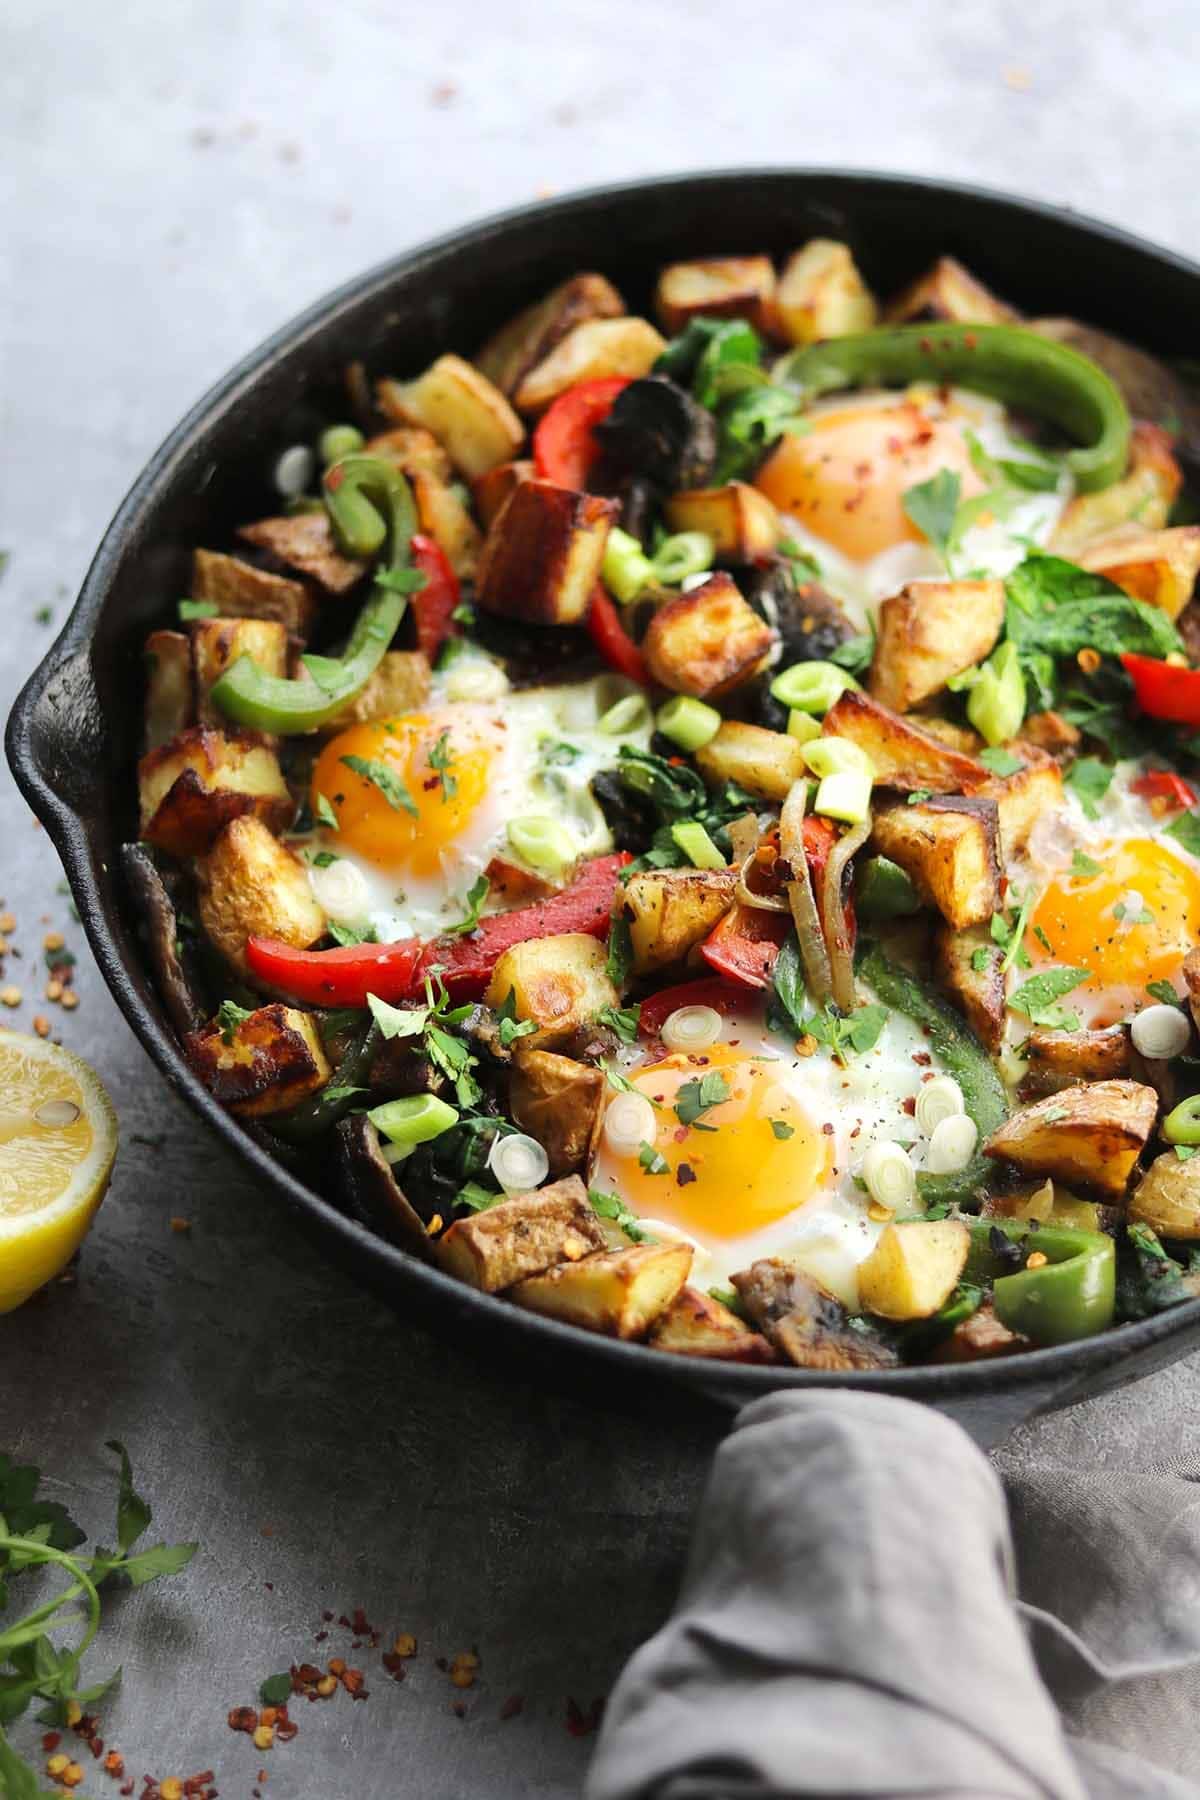 A skillet with a delicious mix of eggs, potatoes, bell peppers, mushrooms, oregano, spinach, green onions and chopped parsley